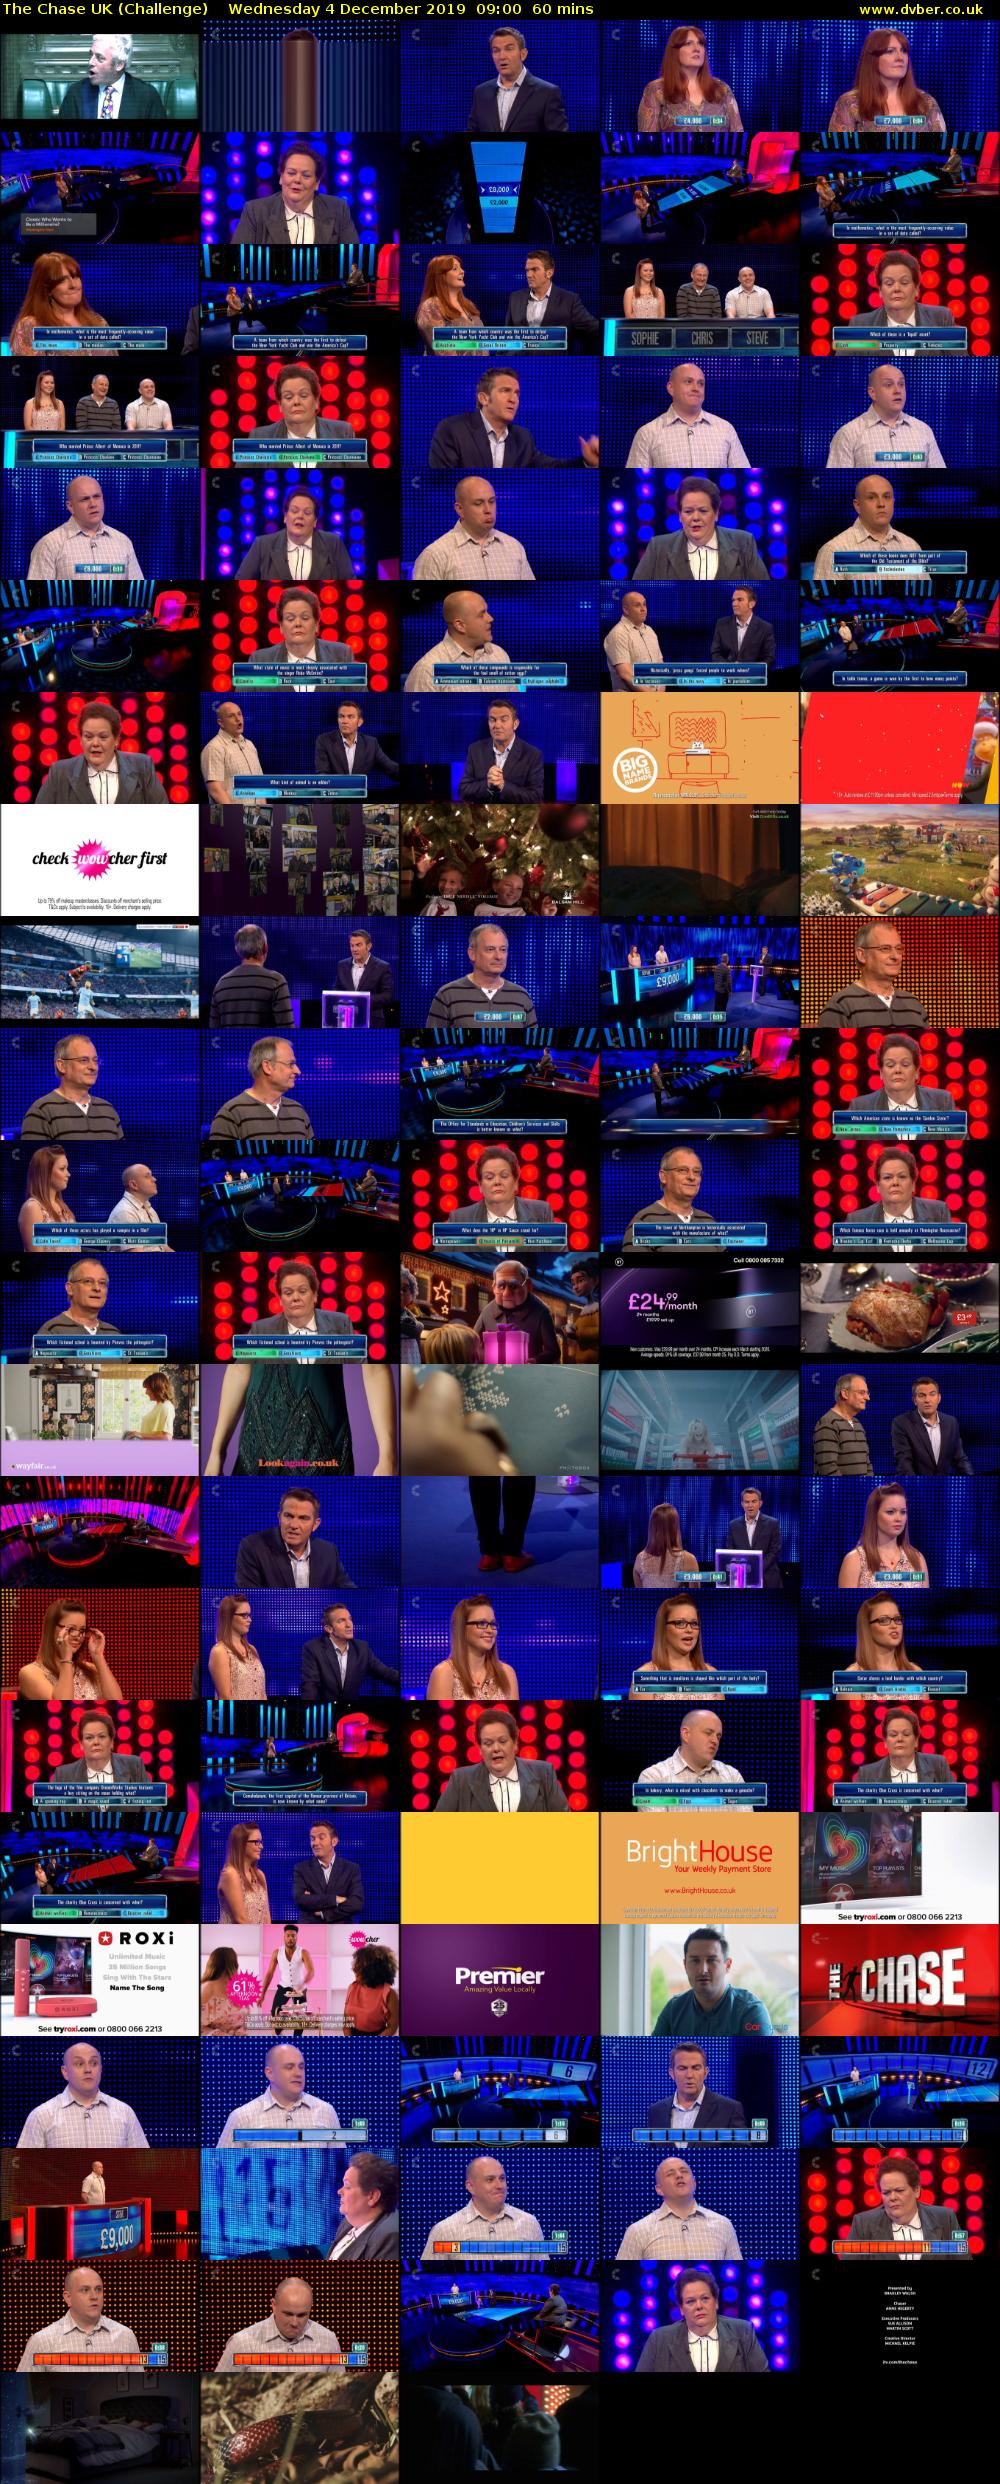 The Chase UK (Challenge) Wednesday 4 December 2019 09:00 - 10:00